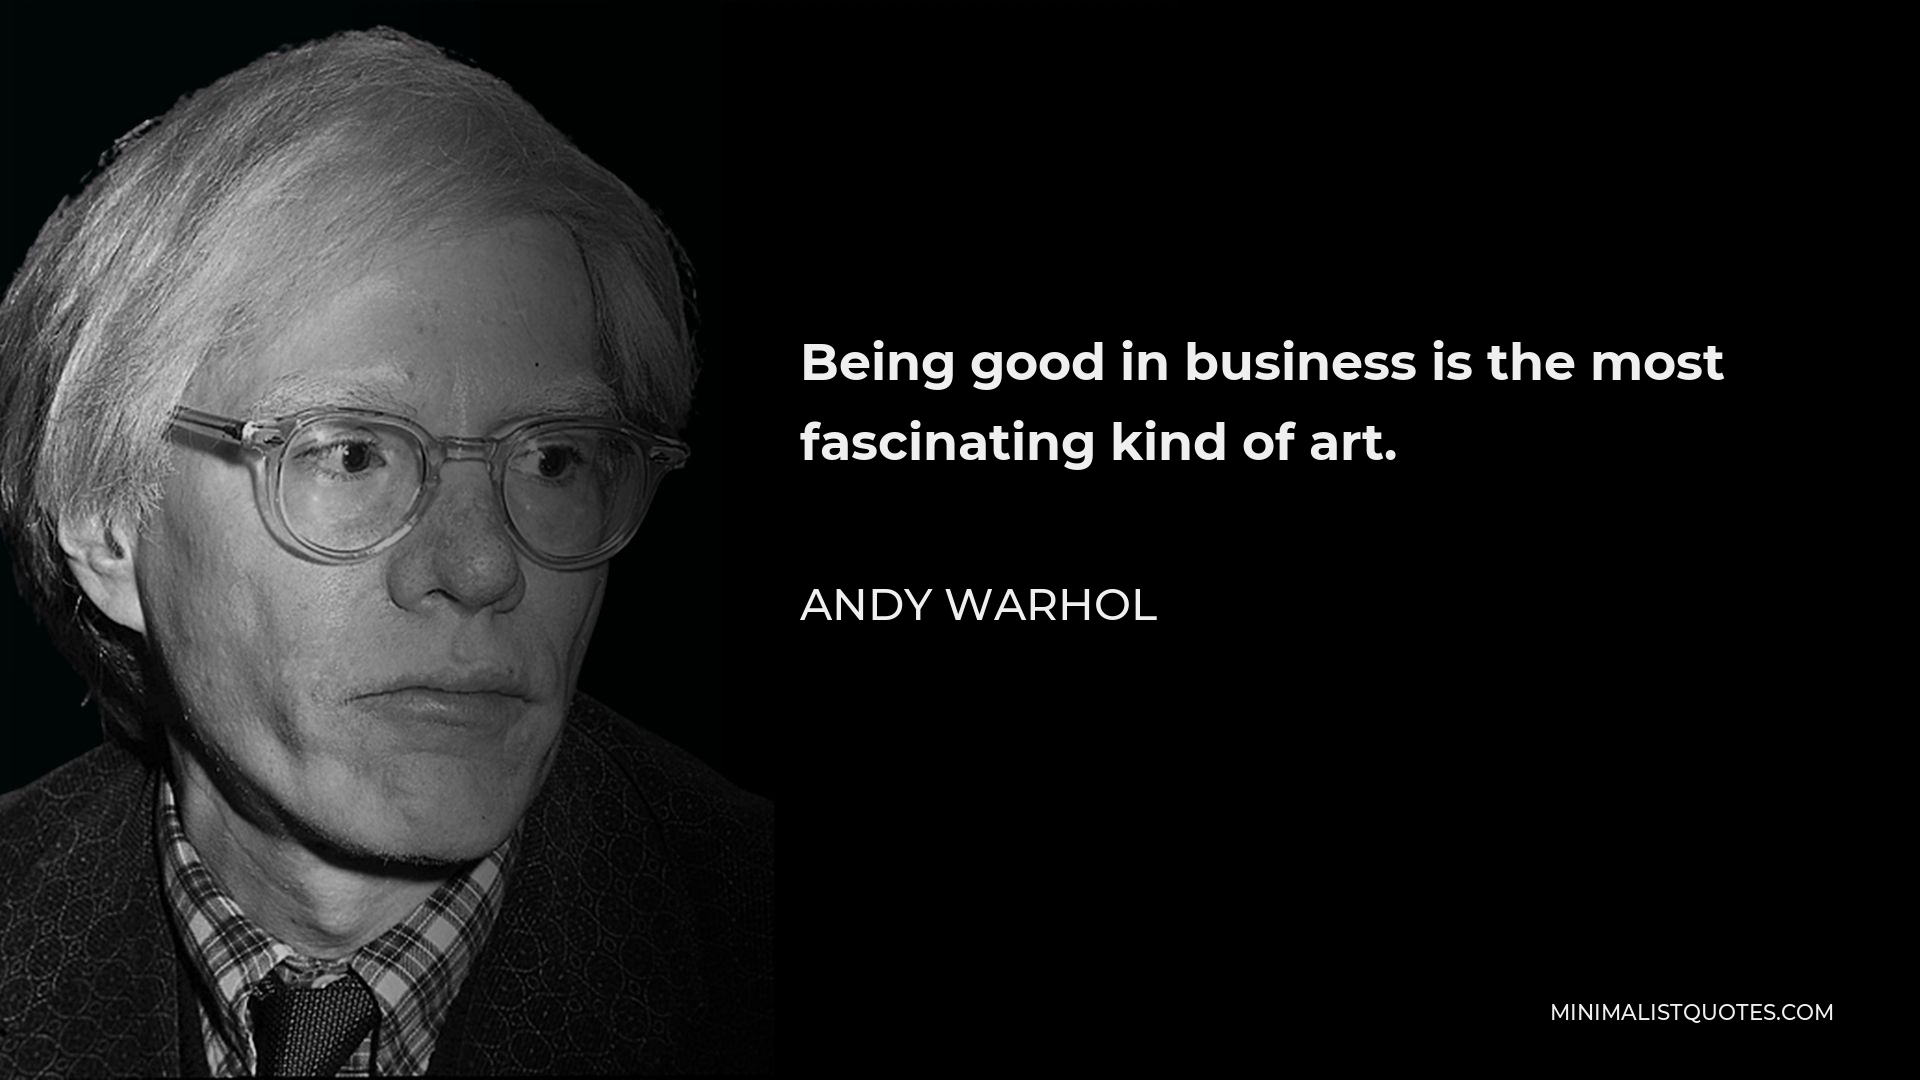 Andy Warhol Quote - Being good in business is the most fascinating kind of art. Making money is art and working is art and good business is the best art.